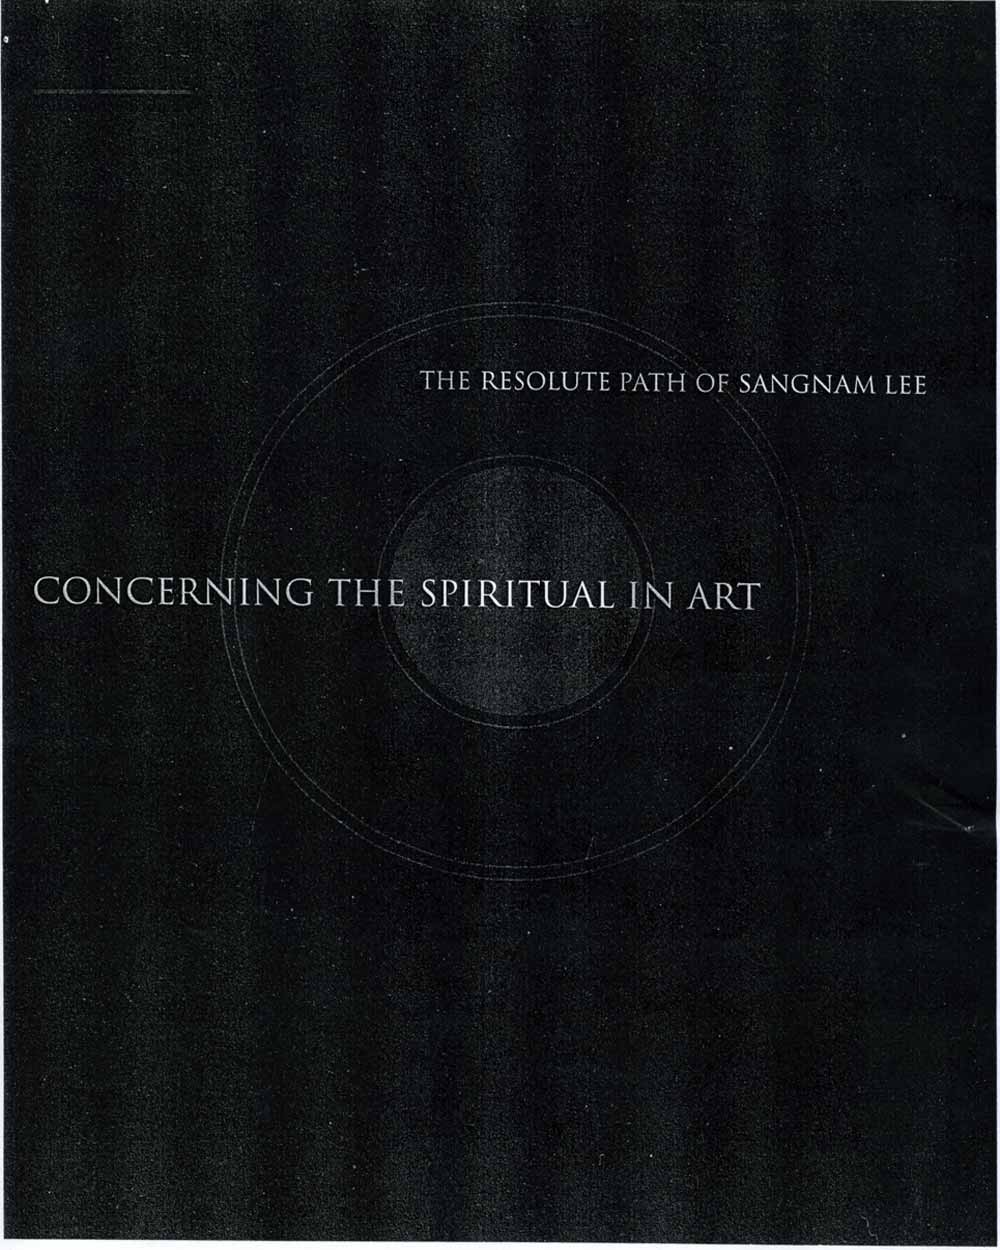 Concerning the Spiritual in Art: The Resolute Path of Sangnam Lee, article, pg 2